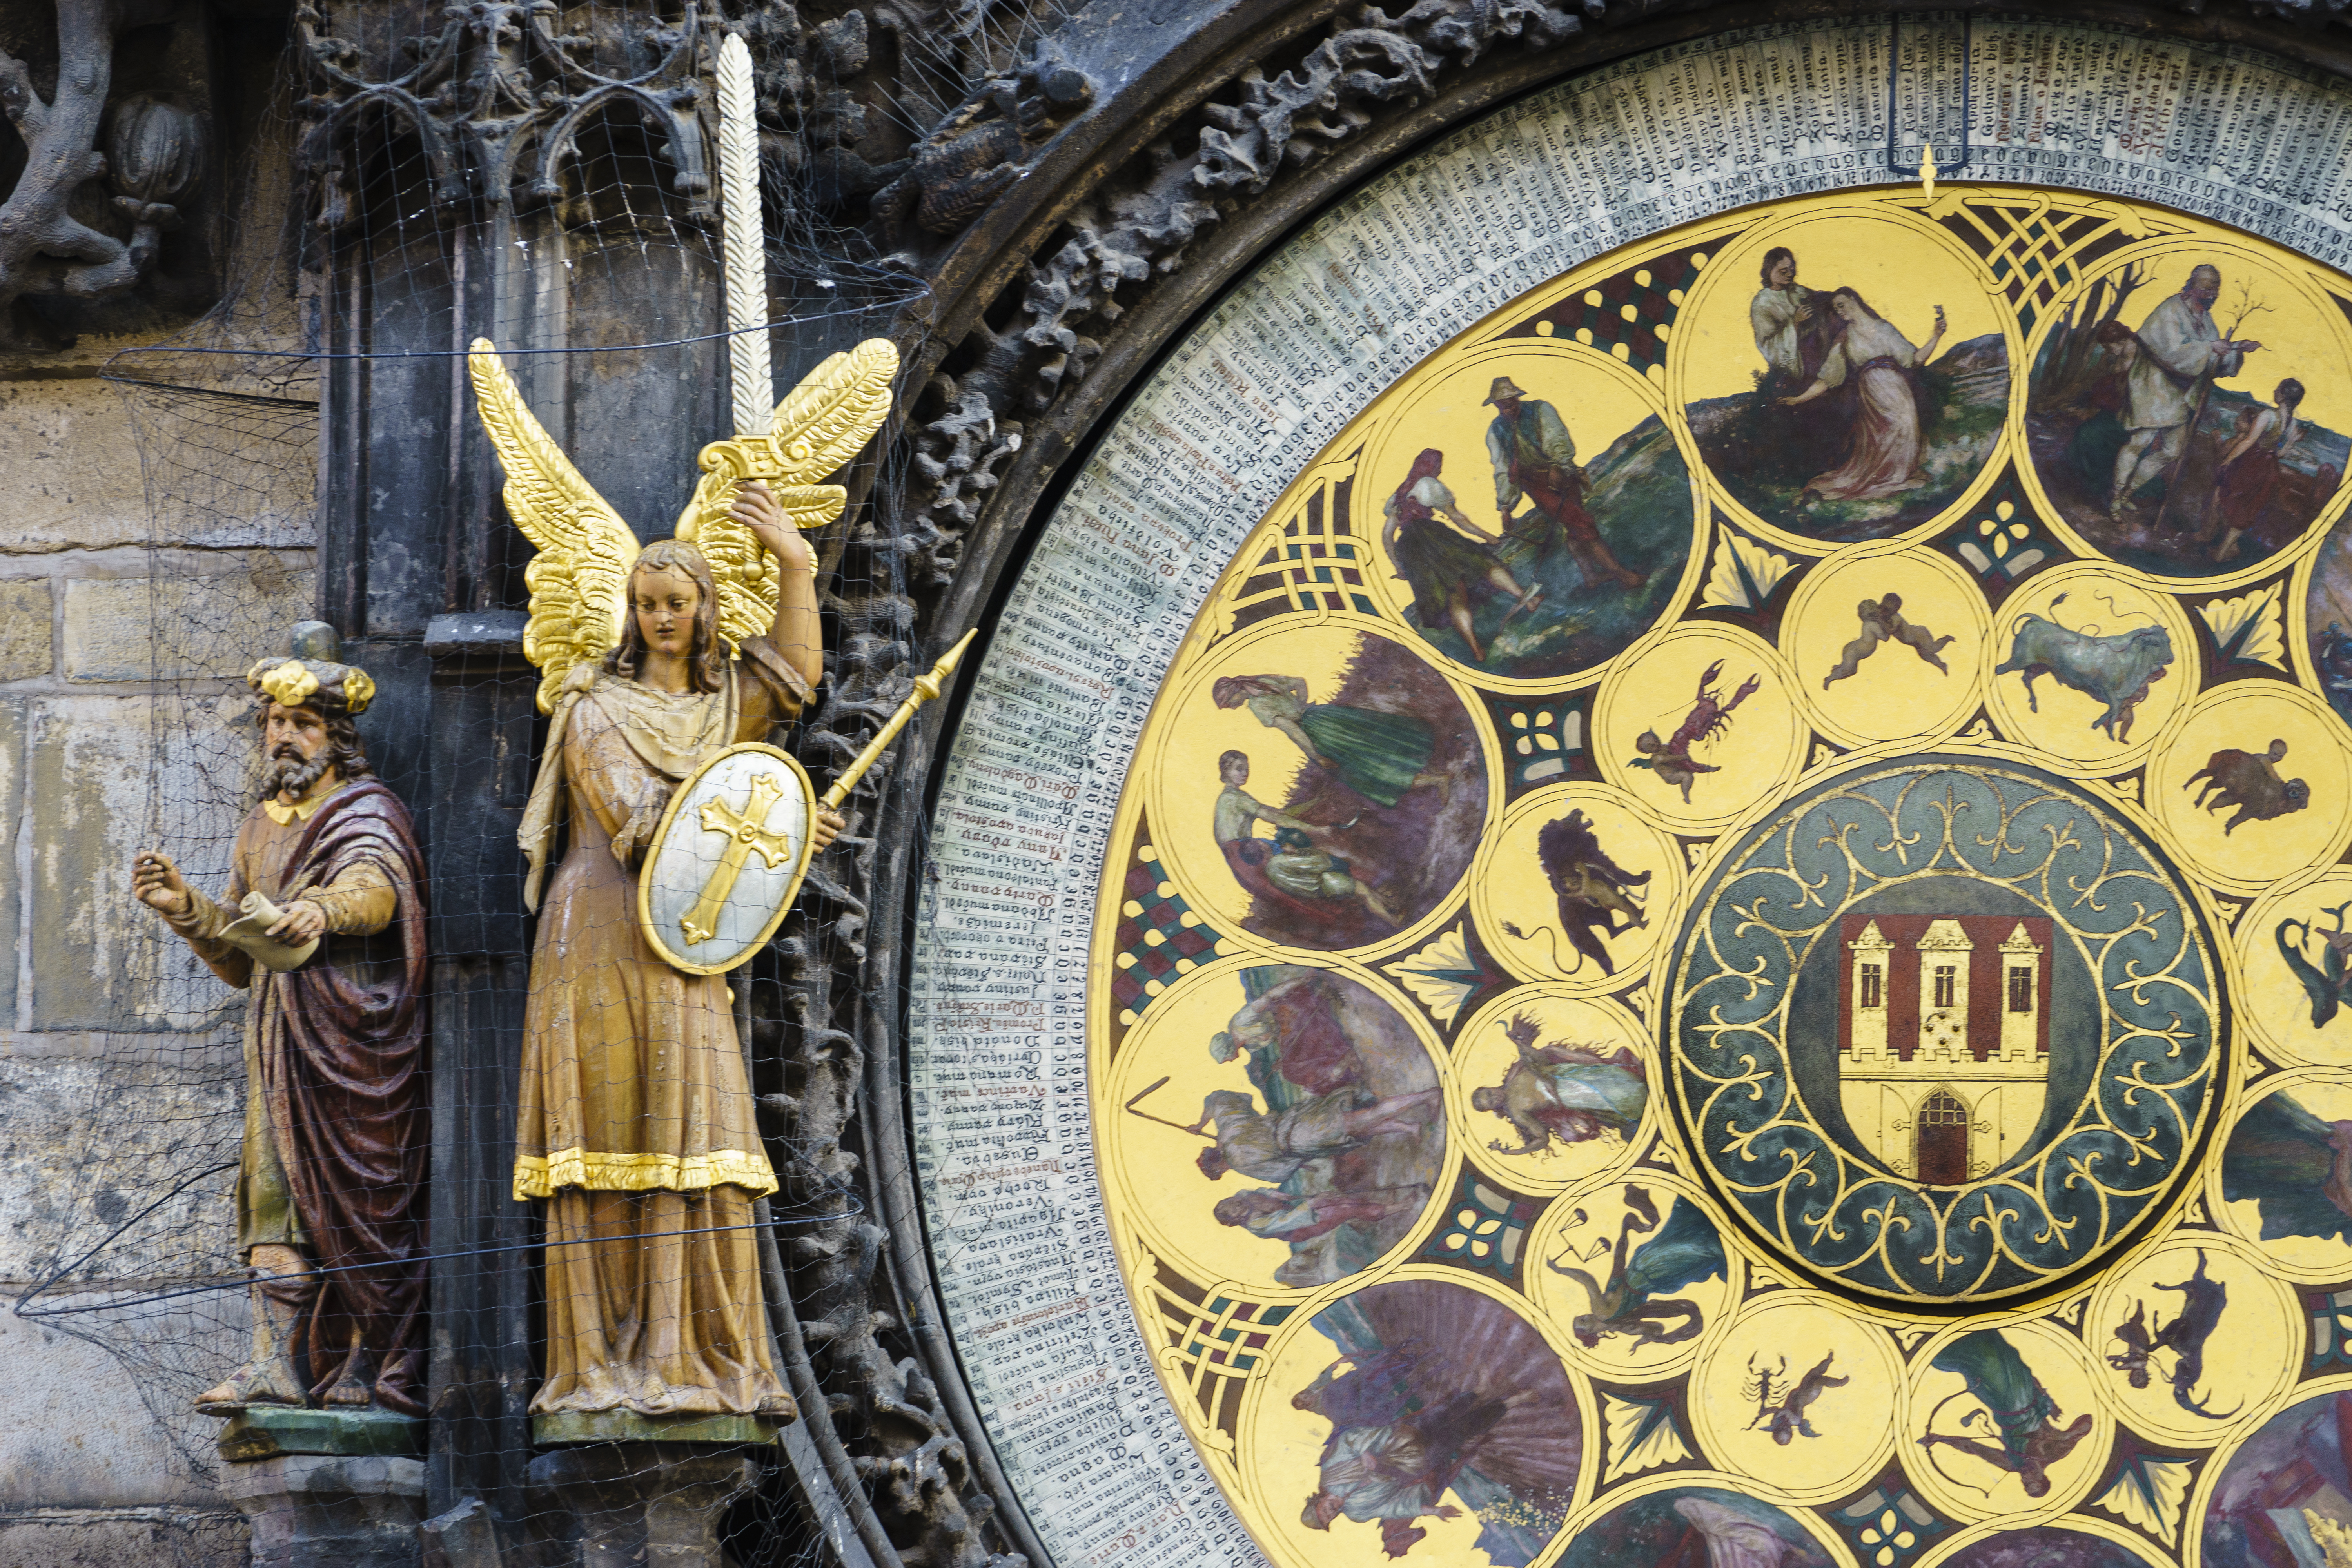 The Astronomical Clock face on the Old Town Hall, Old Town Square, Prague